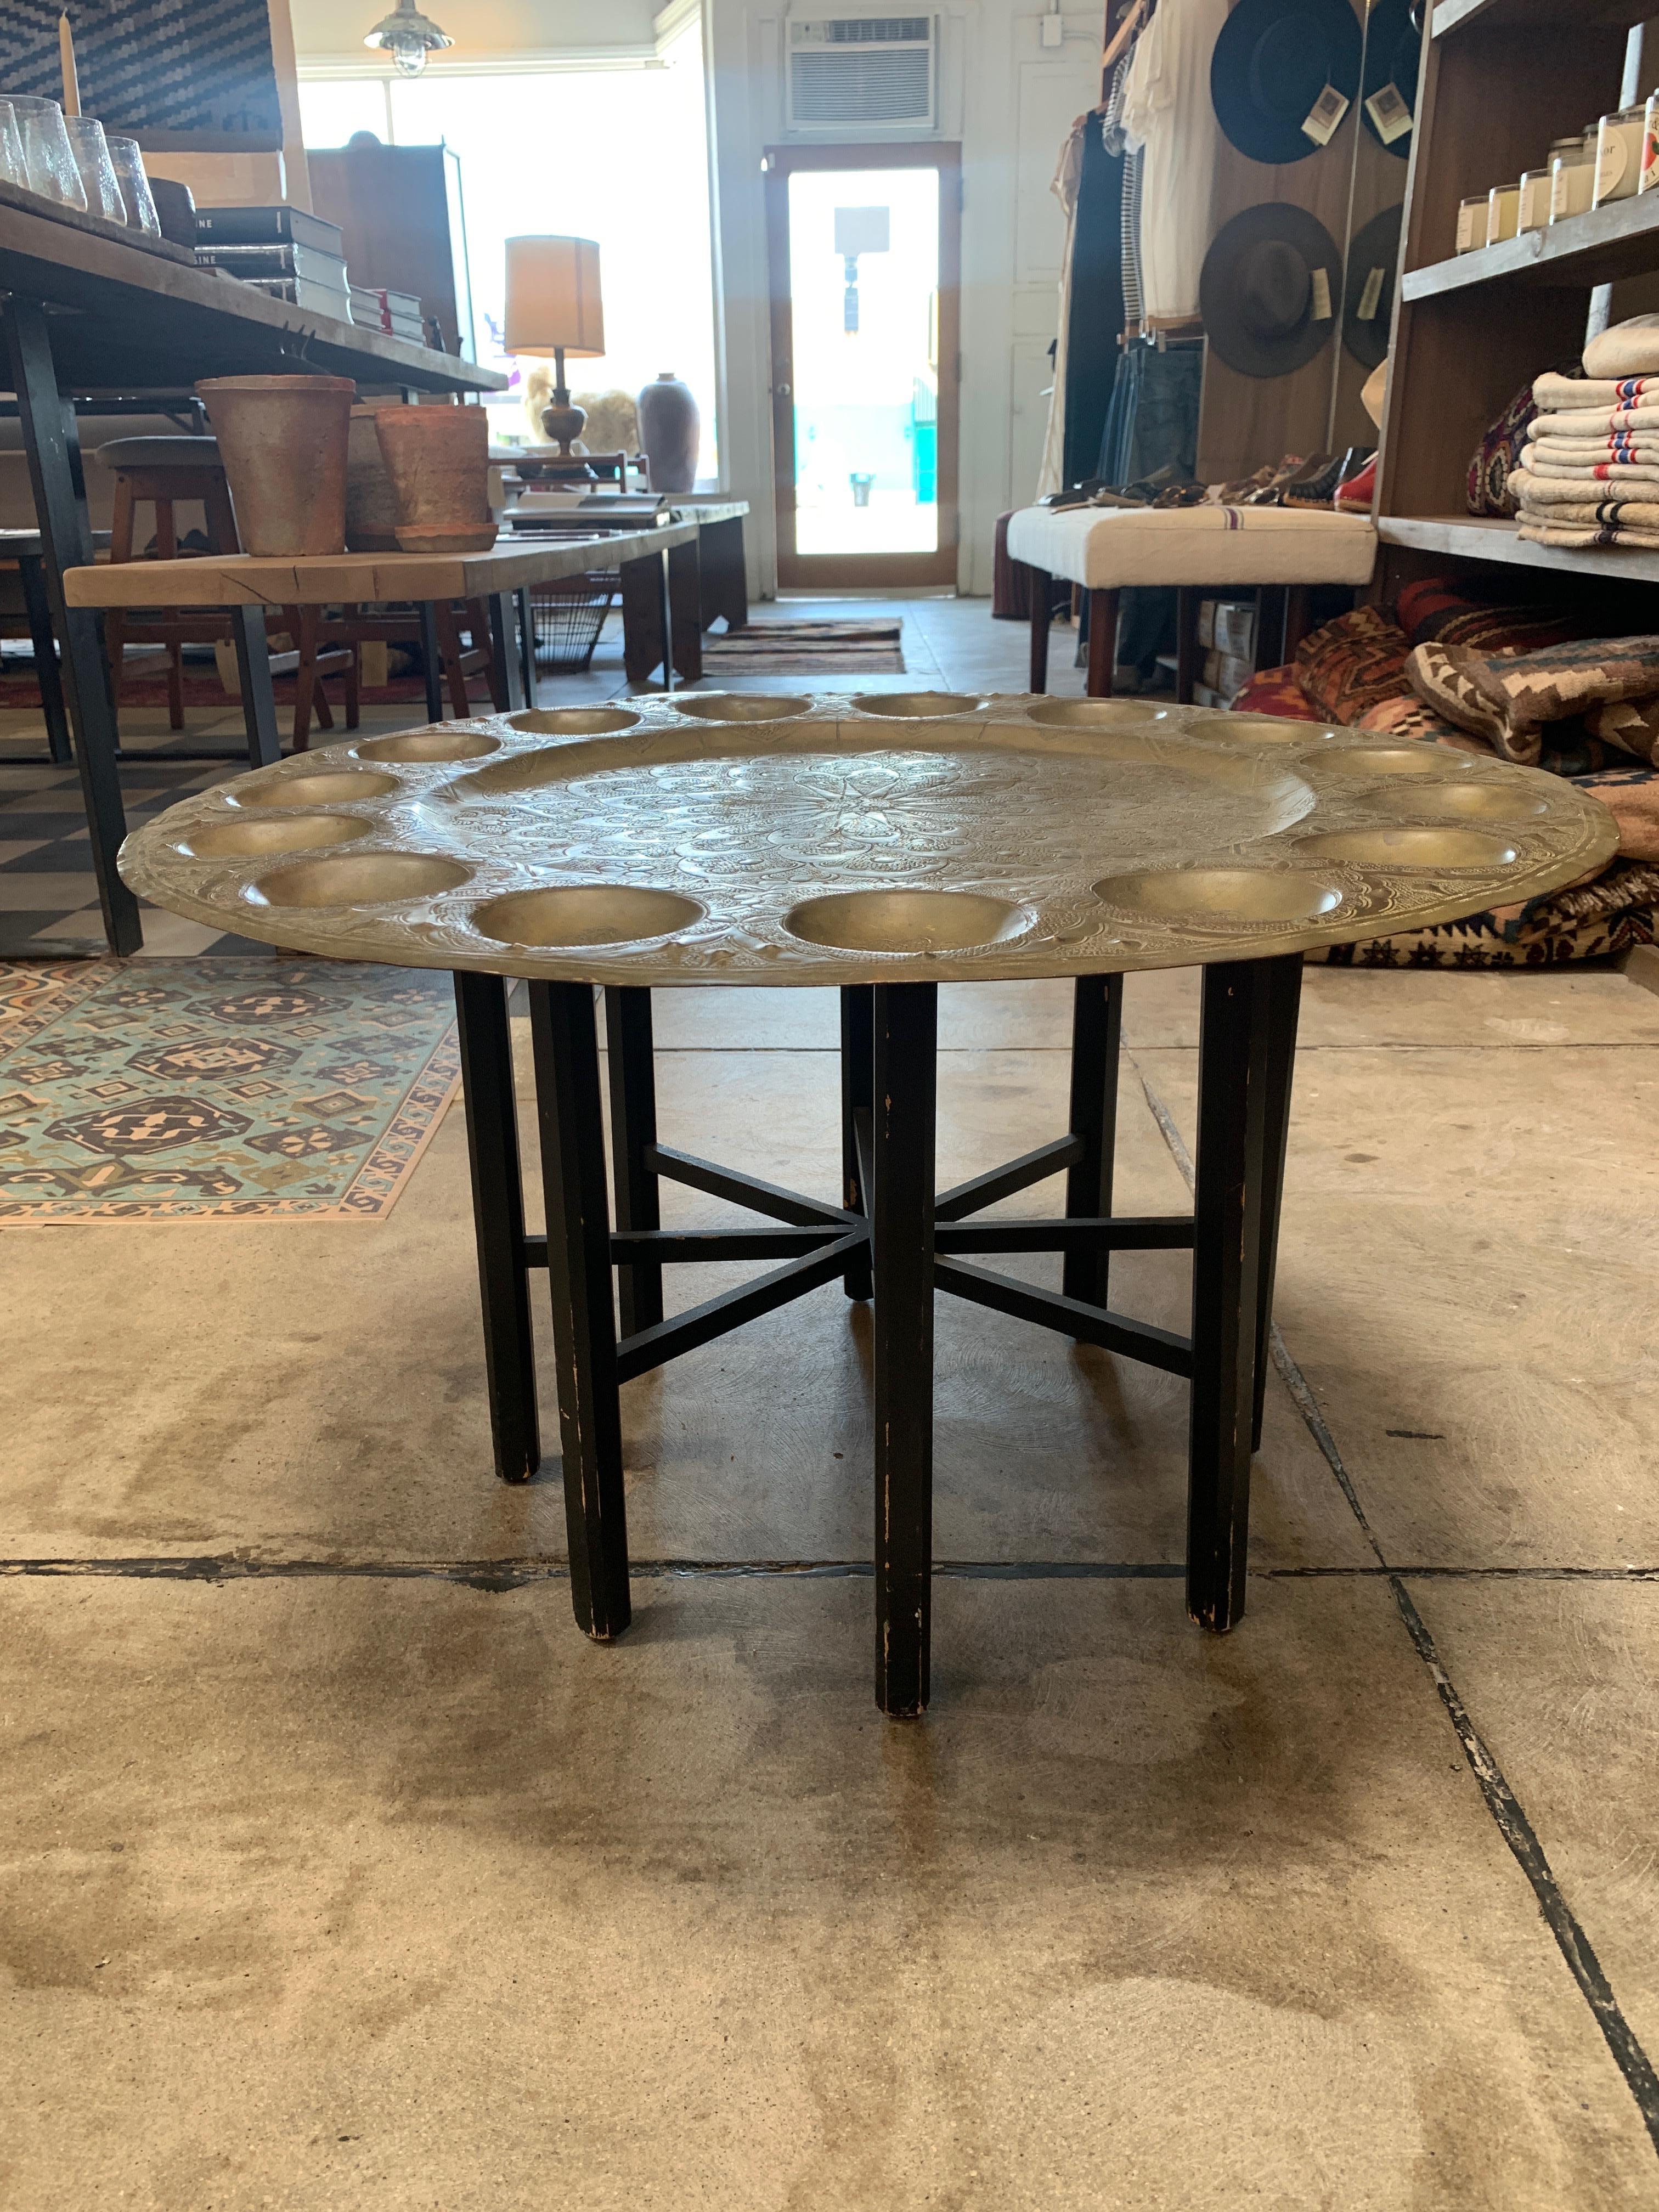 Vintage brass tray table from Morocco, features indents around the circumference of the tray for cups or glasses, and intricate designs carved into the metal. Accompanied by a wooden Stand painted black. This table is great as a side or end table,